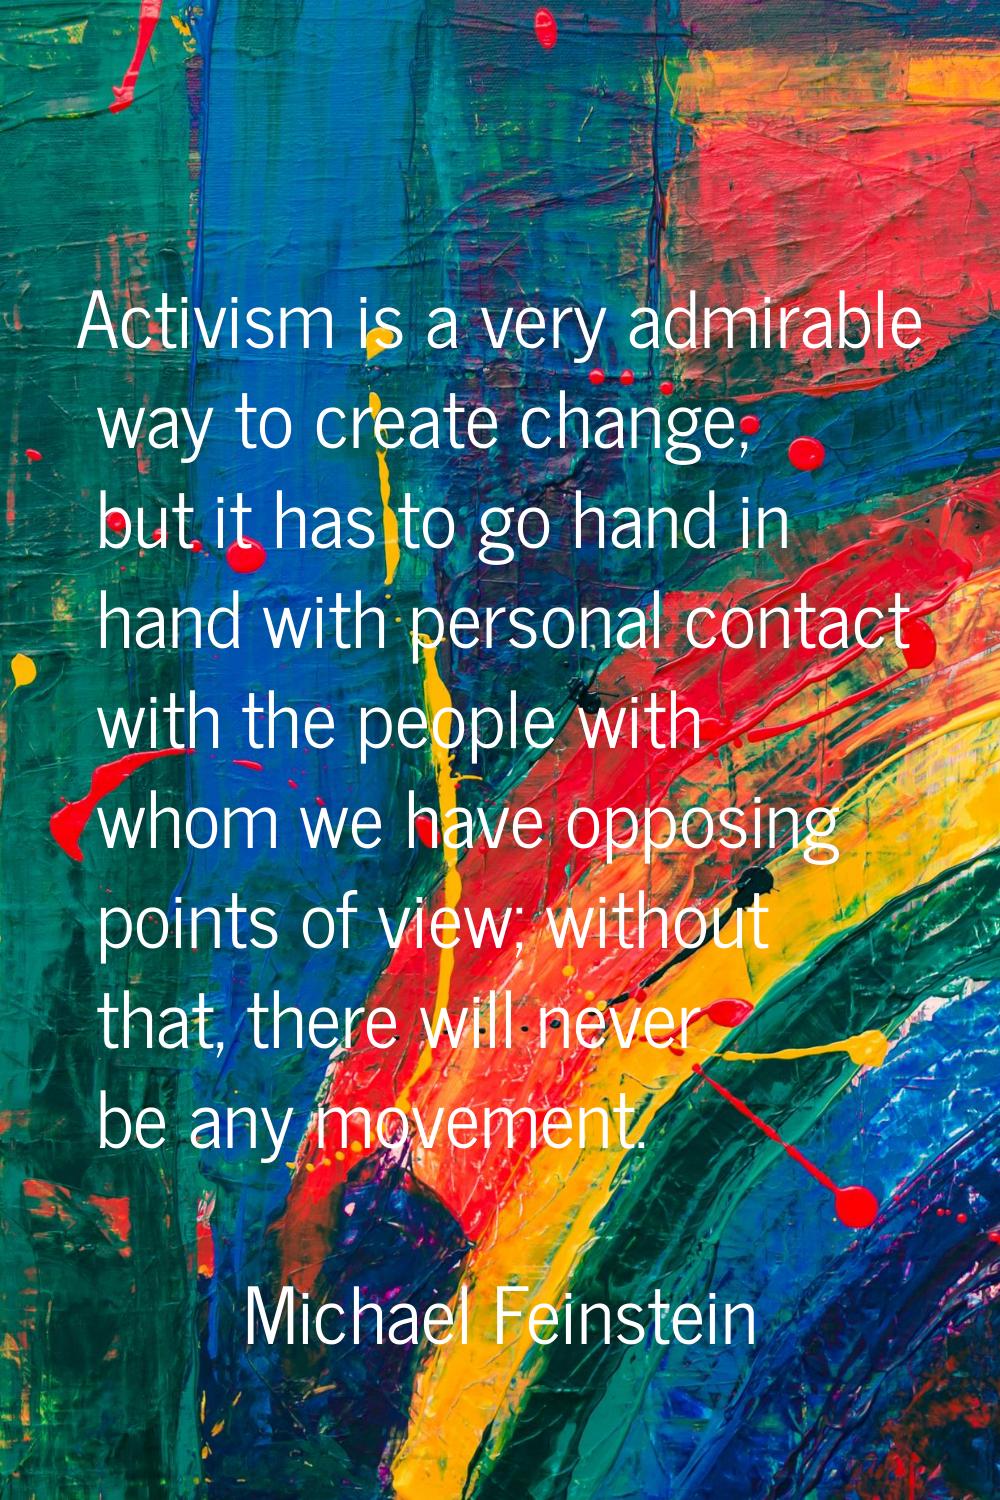 Activism is a very admirable way to create change, but it has to go hand in hand with personal cont